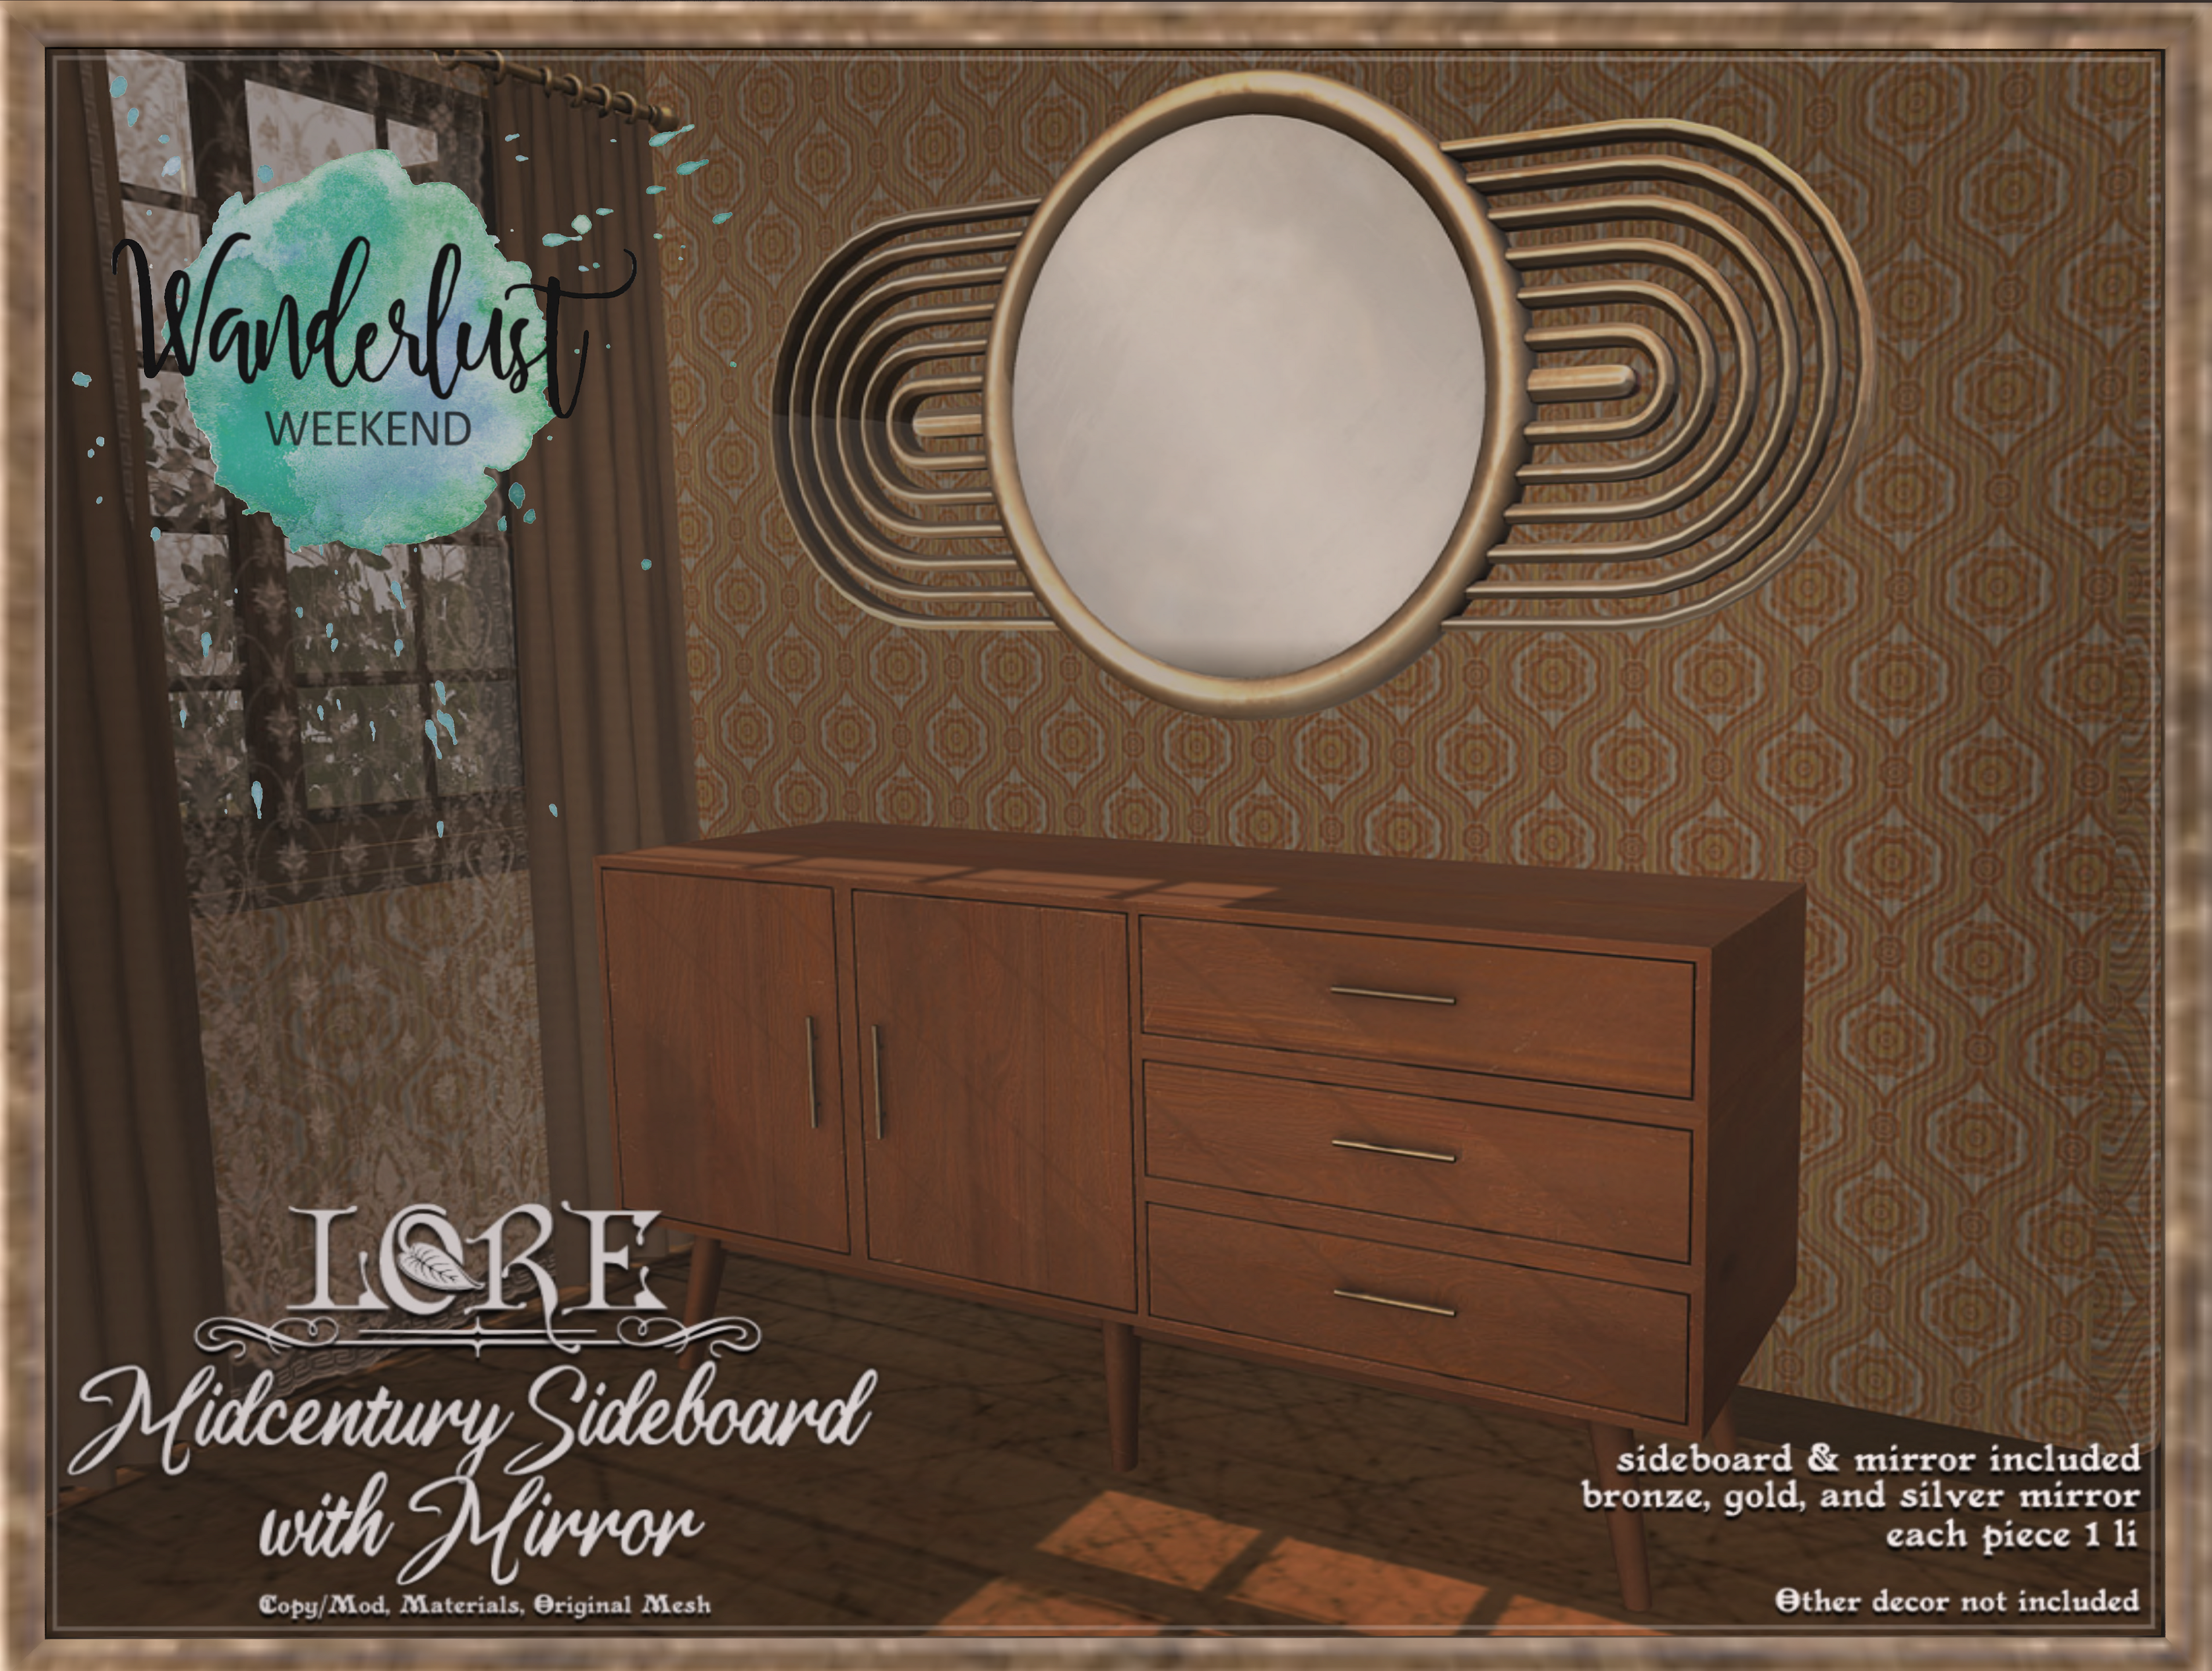 Lore – Midcentury Sideboard with Mirror